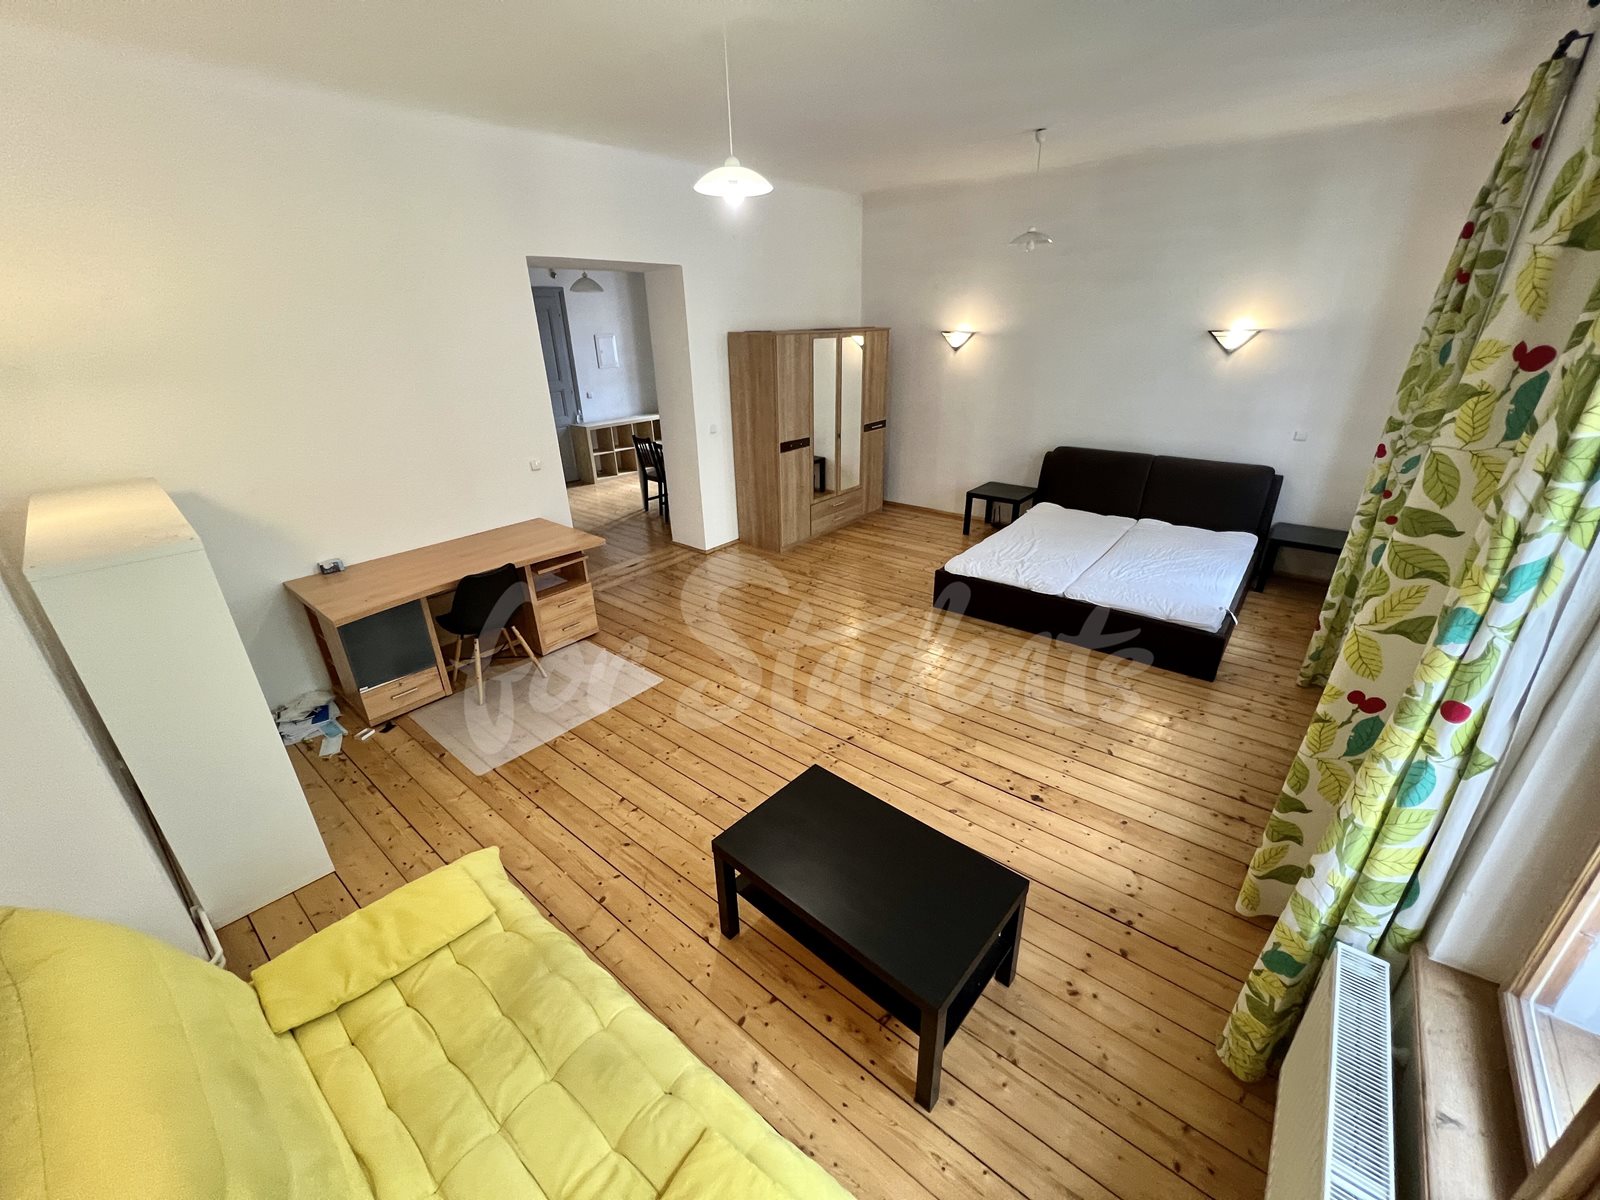 One bedroom apartment in the Old Town, Hradec Králové